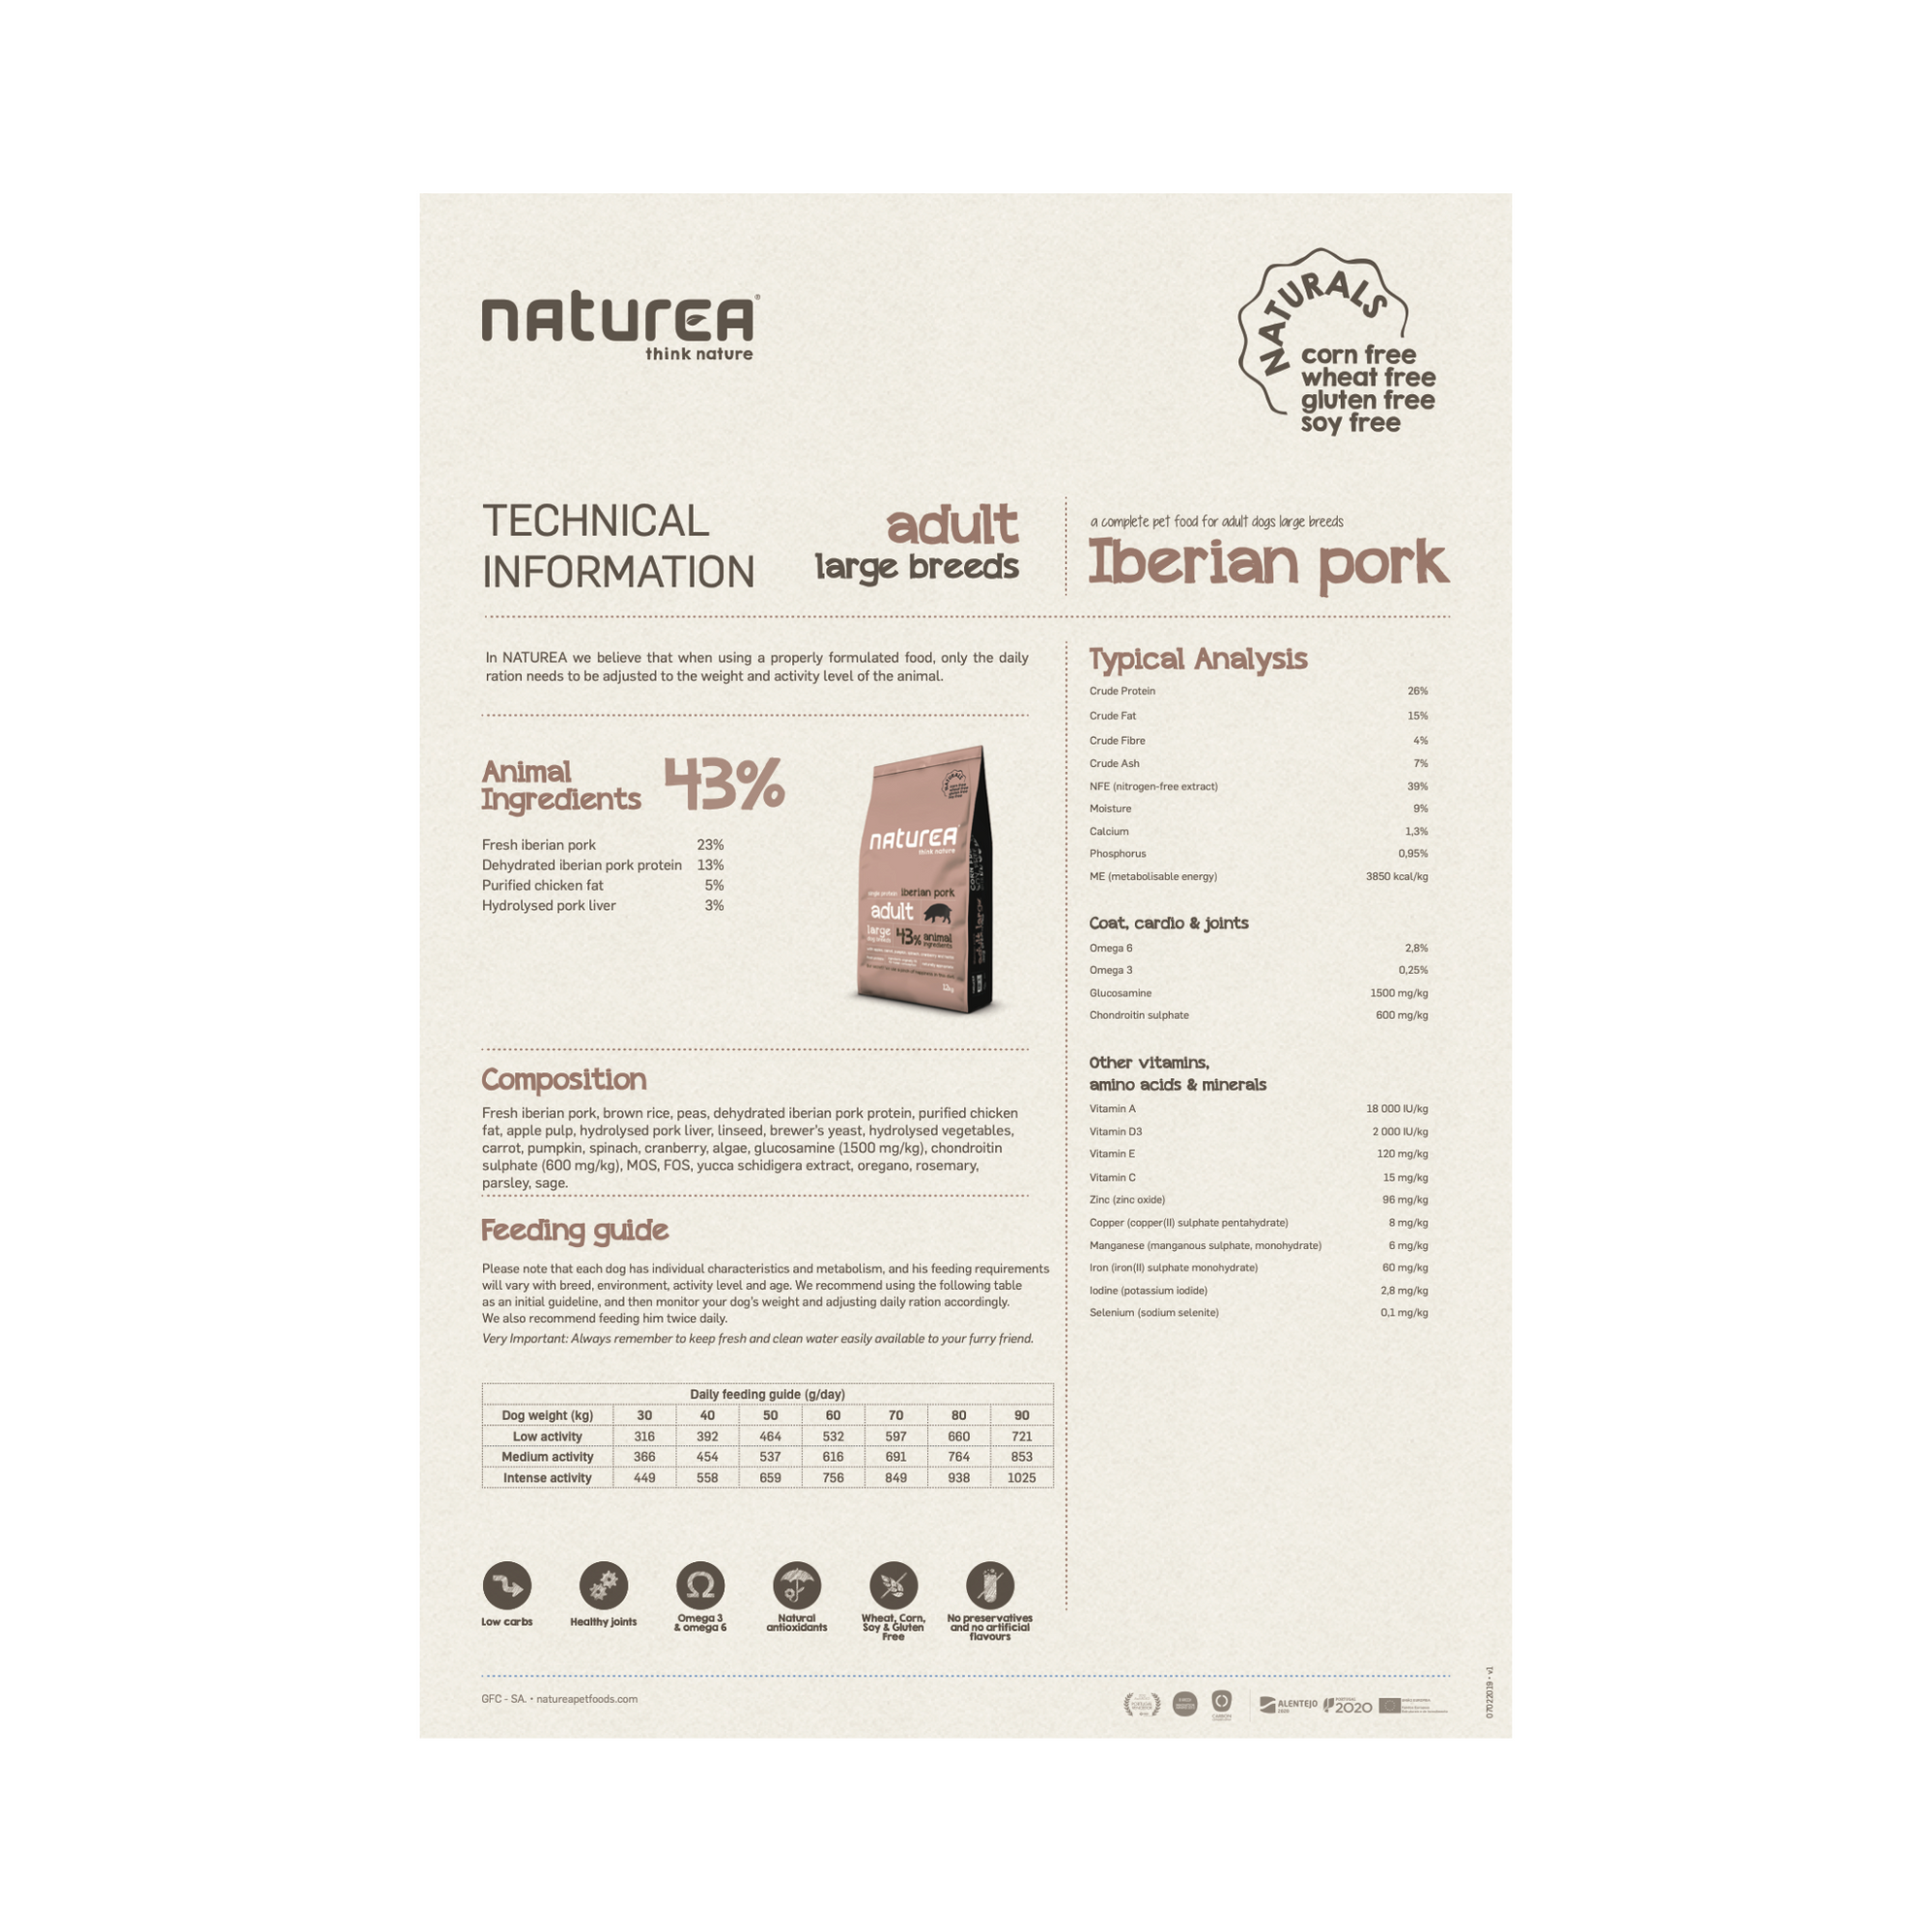 High-quality feed with Iberian pork meat for adult dogs Naturea Naturals